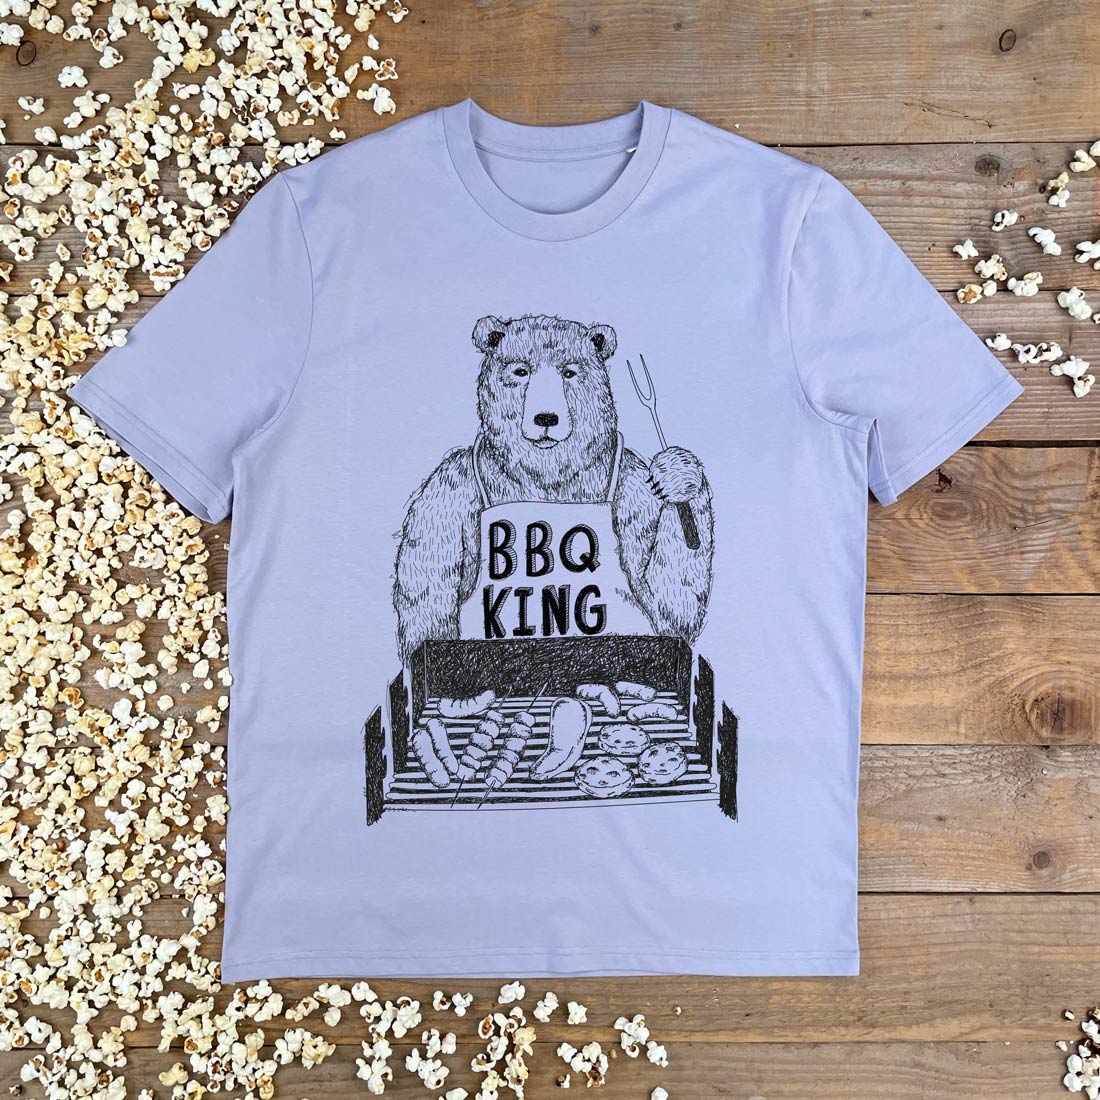 BBQ KING TEXT TSHIRT WITH A BEAR